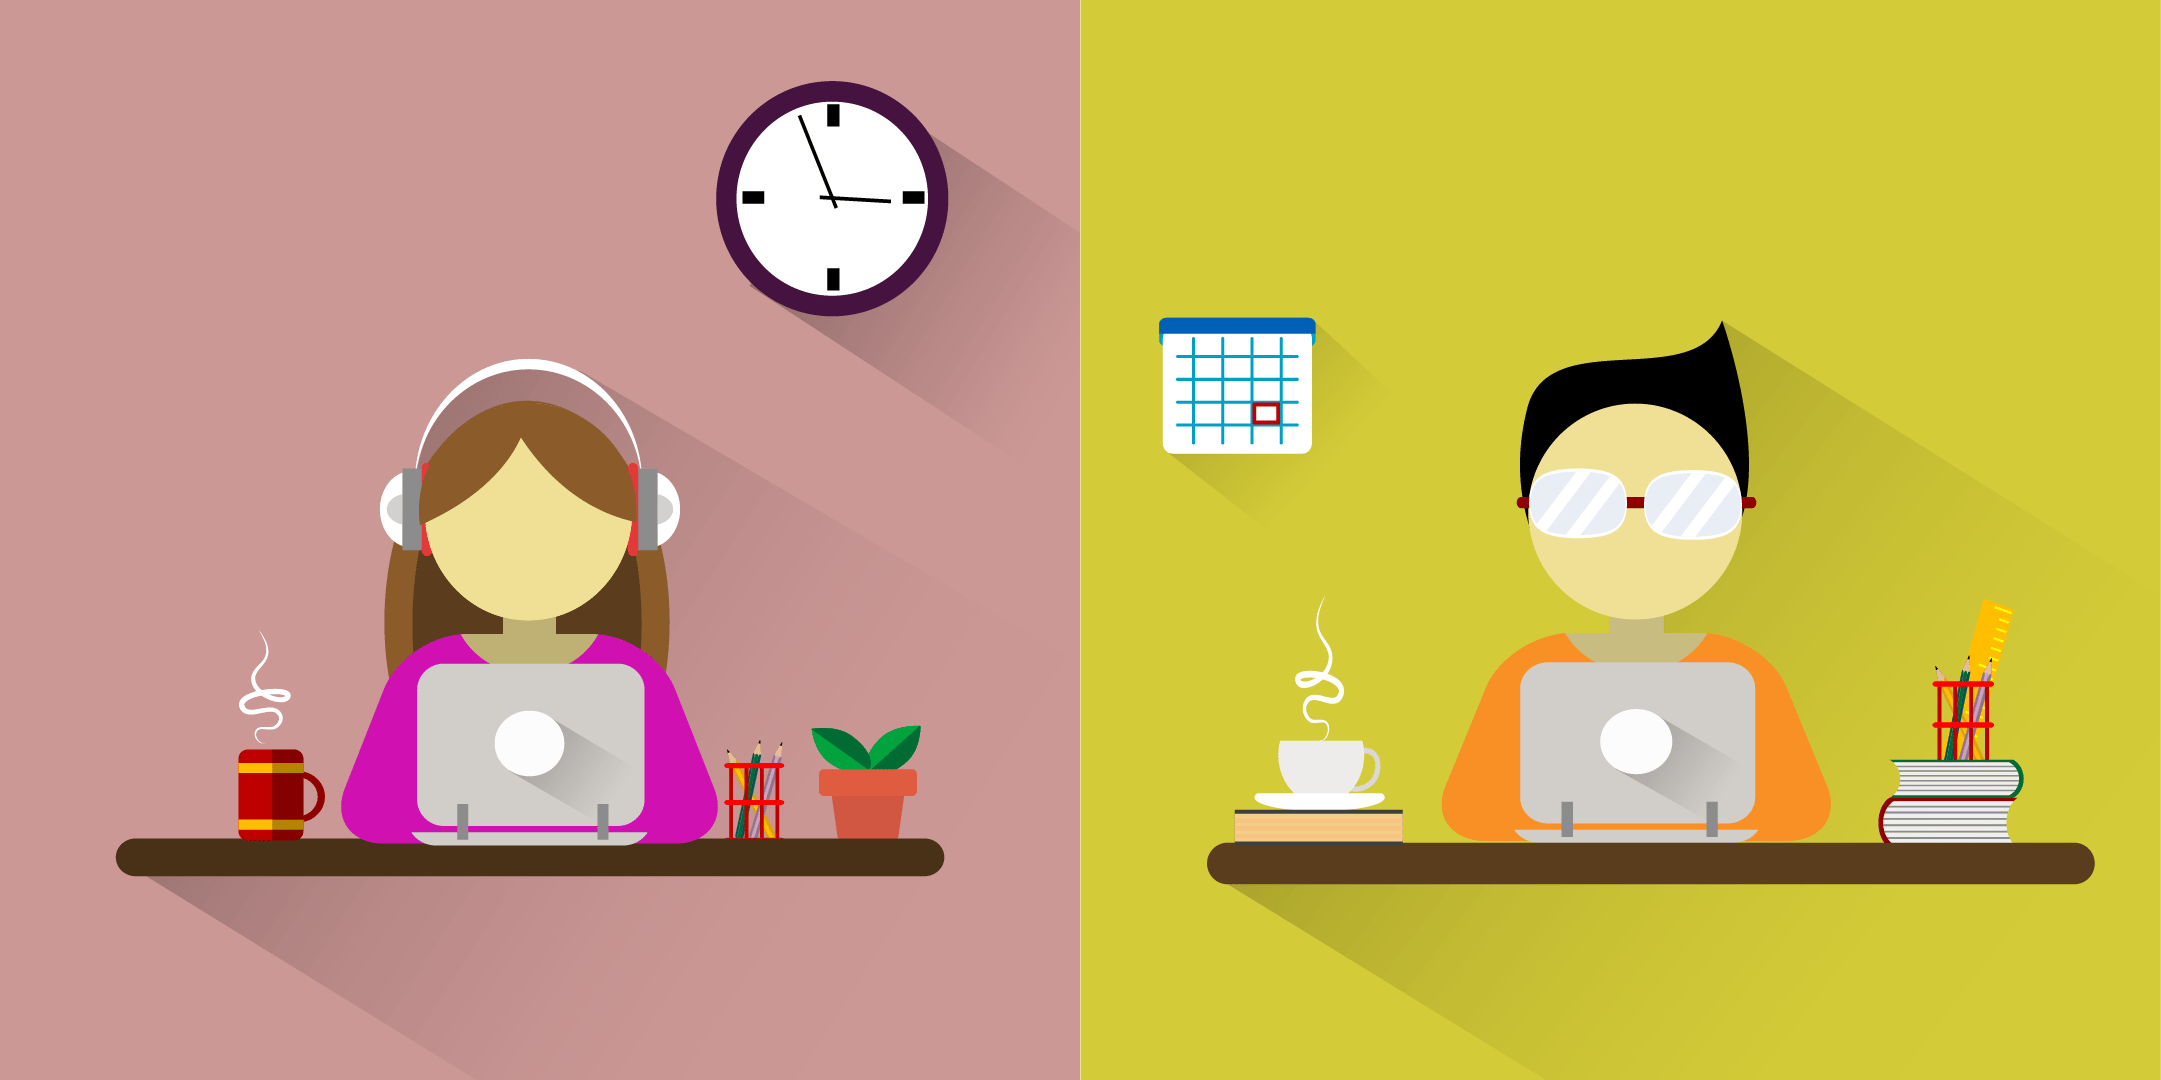 Flat graphic design about one woman and one man working on a desk with different background, colors, and decoration